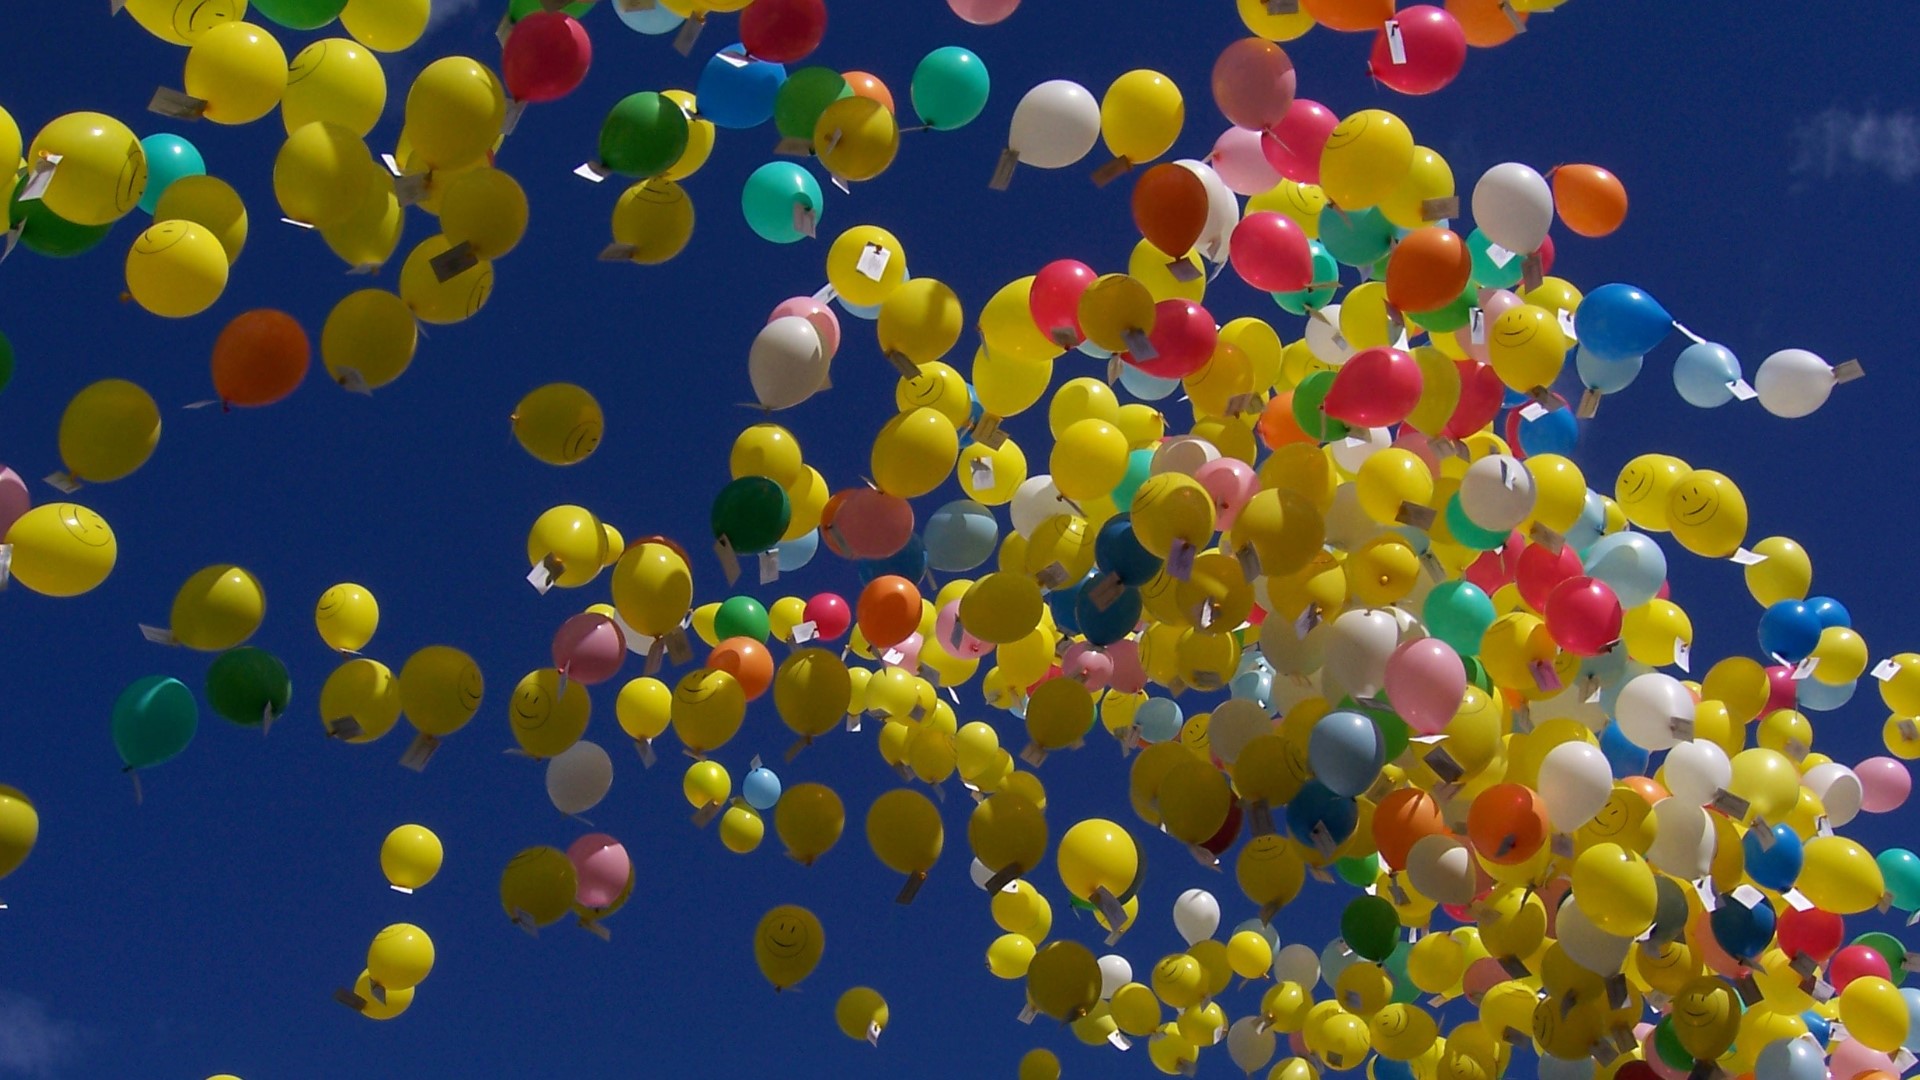 The ban limits balloon releases to no more than 10.